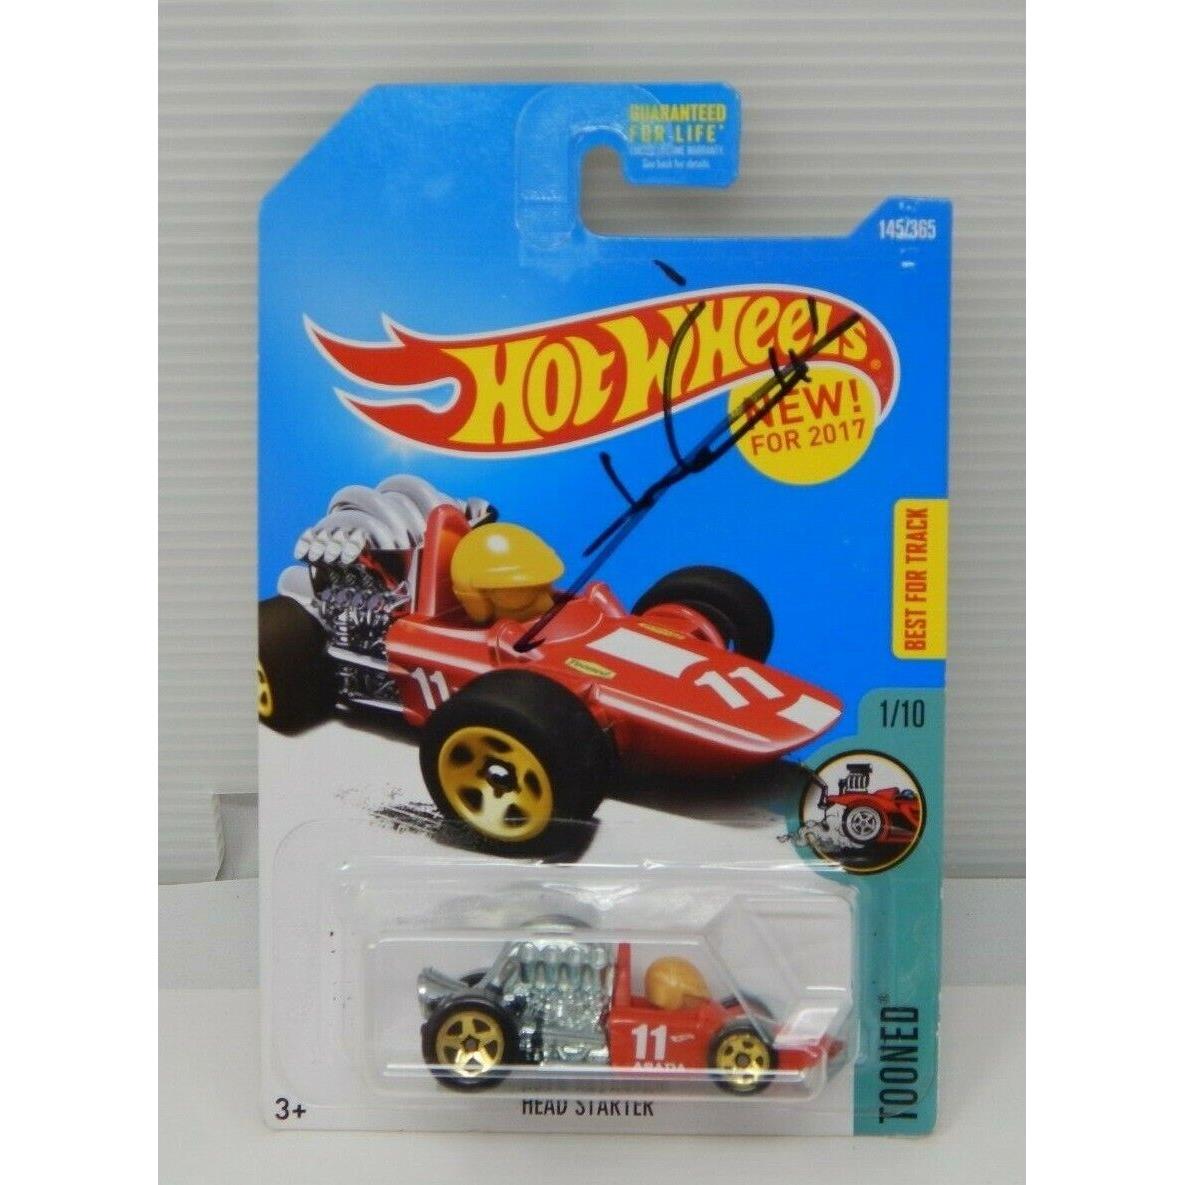 Hot Wheels 2017 Tooned Head Starter 1/10 Signed by Mario Andretti